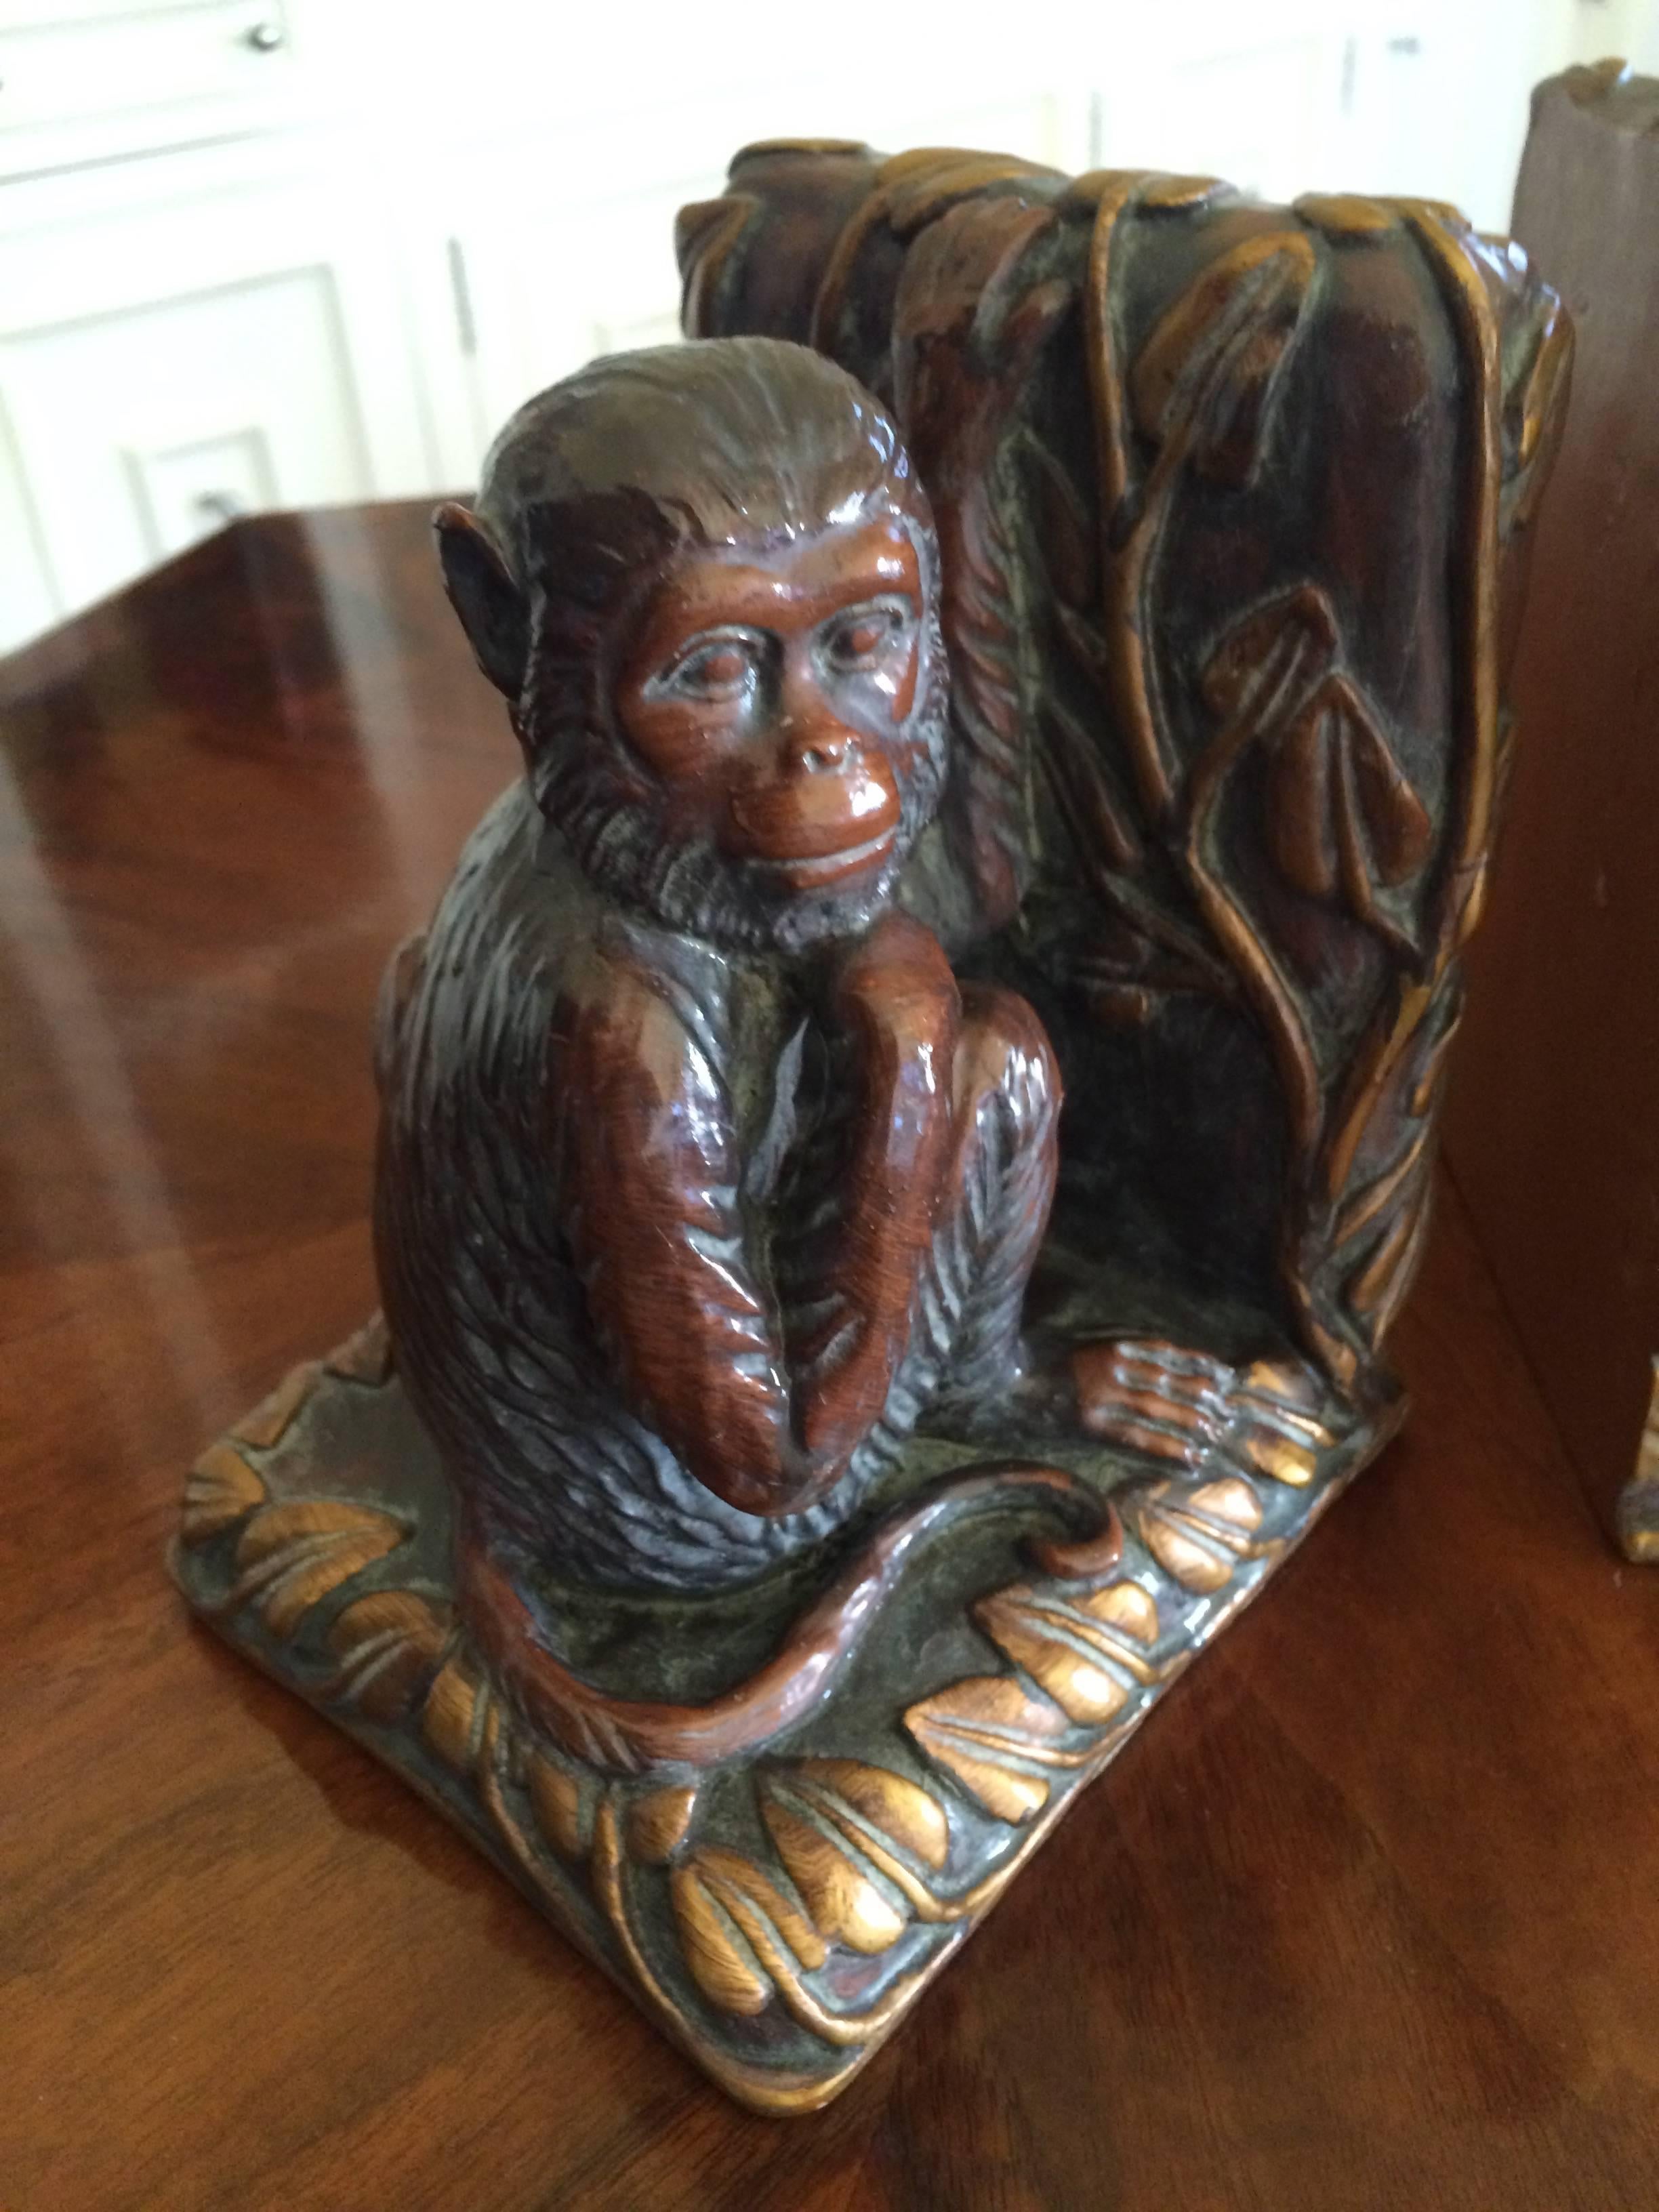 Phenomenal pair of book ends with a Monkeys.  We are reminded of the sophisticated and whimsical, Tony Duquette, as the pair are beautifully paired - one Monkey peering across at his mate and baby Monkey.

The material appears to be plaster with